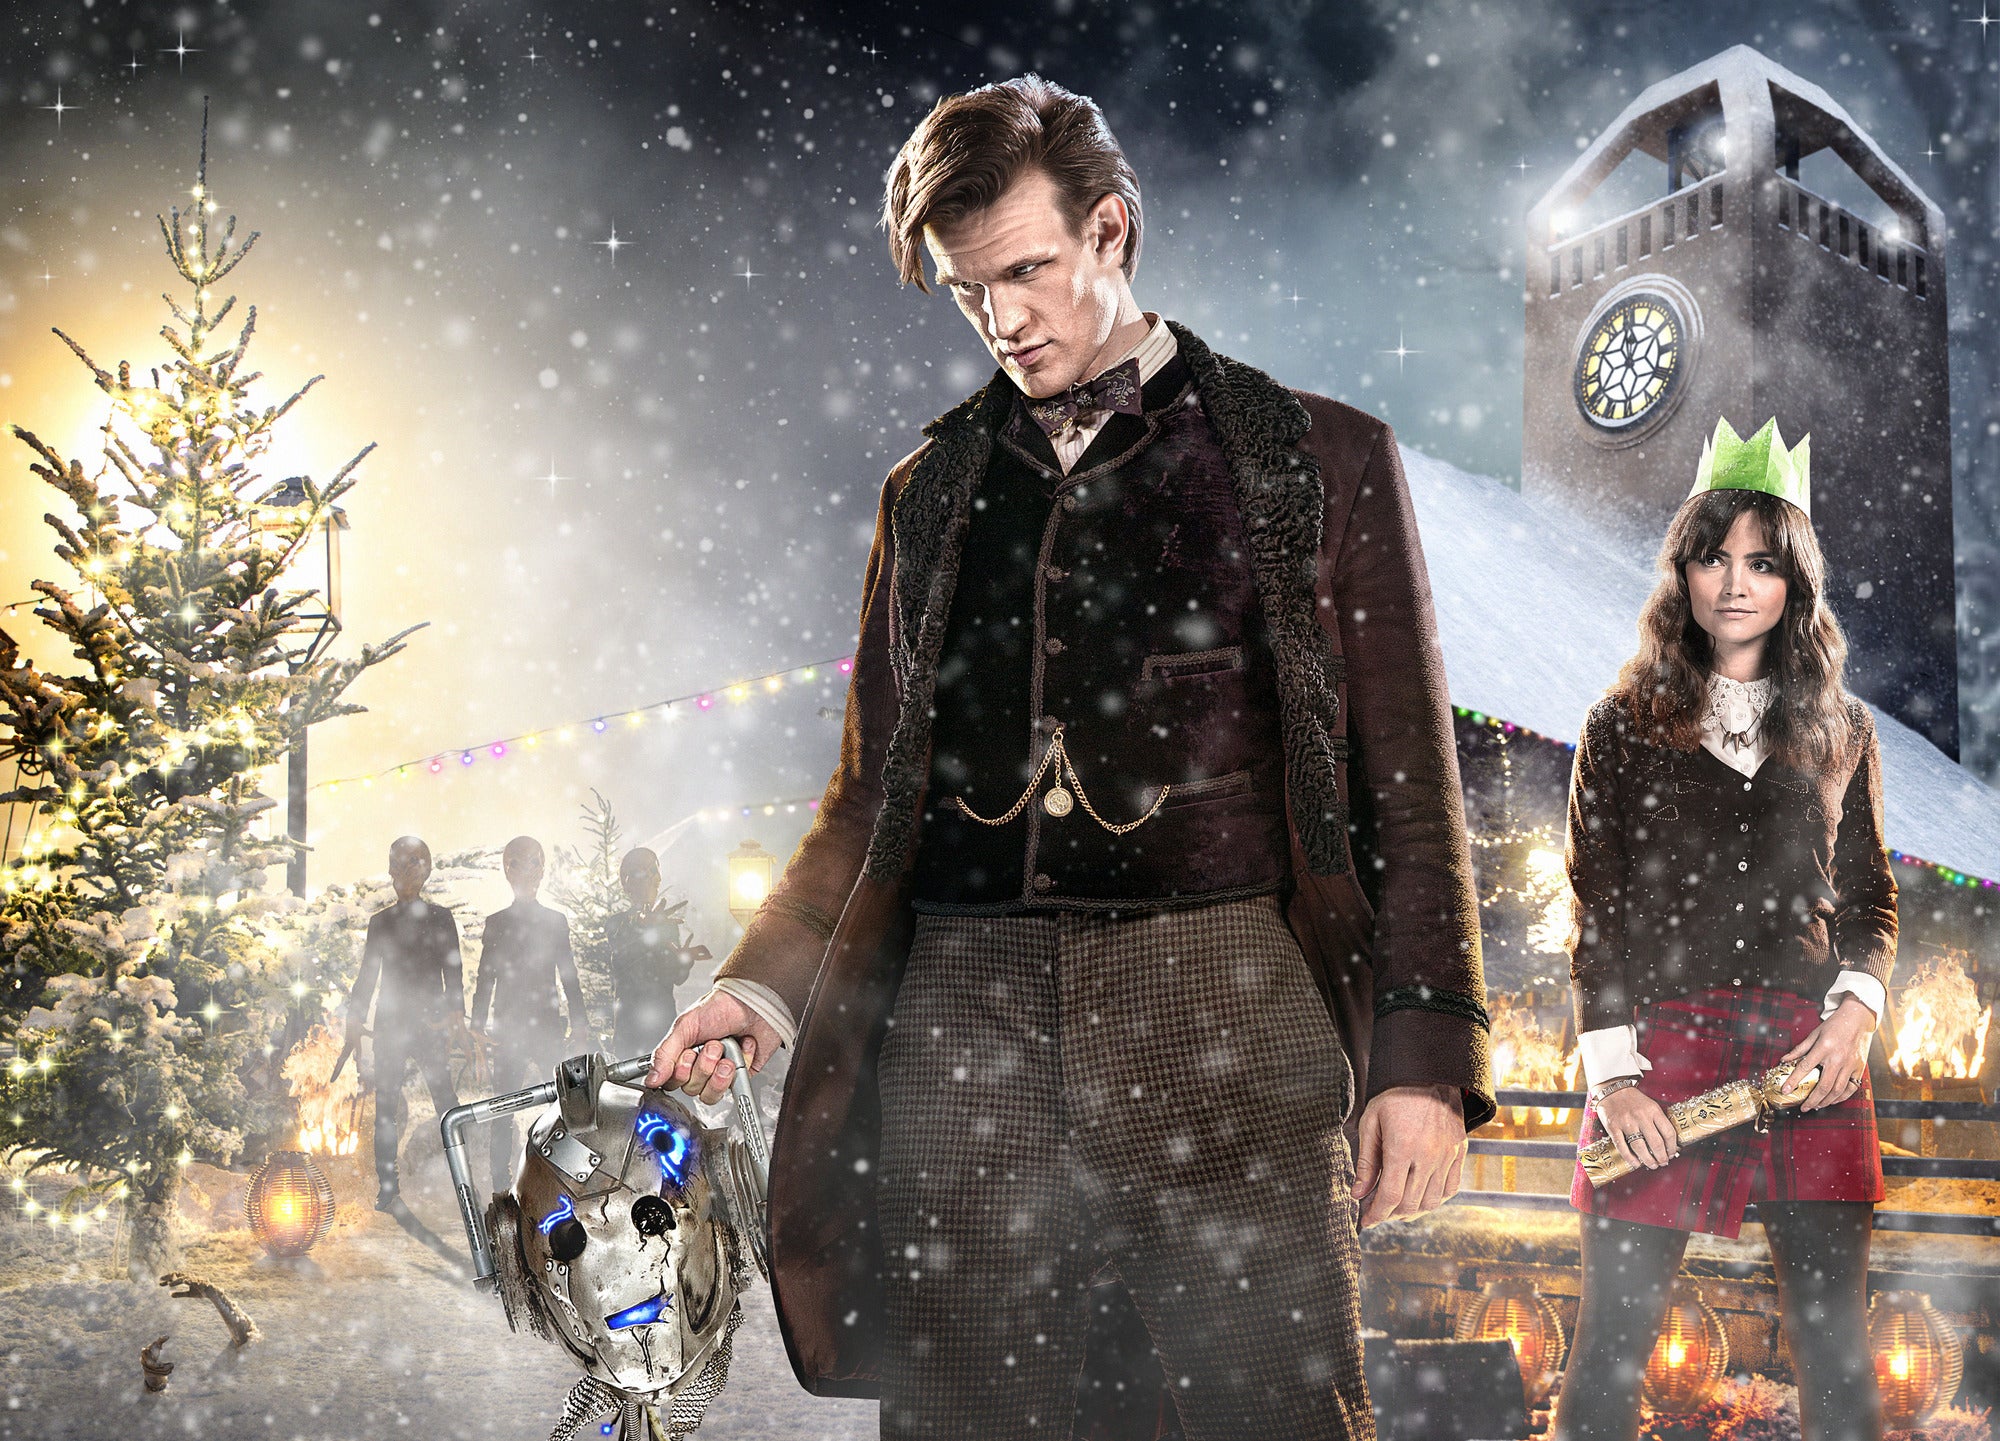 Seasons repeatings: Matt Smith and Jenna Coleman in the Doctor Who Christmas special